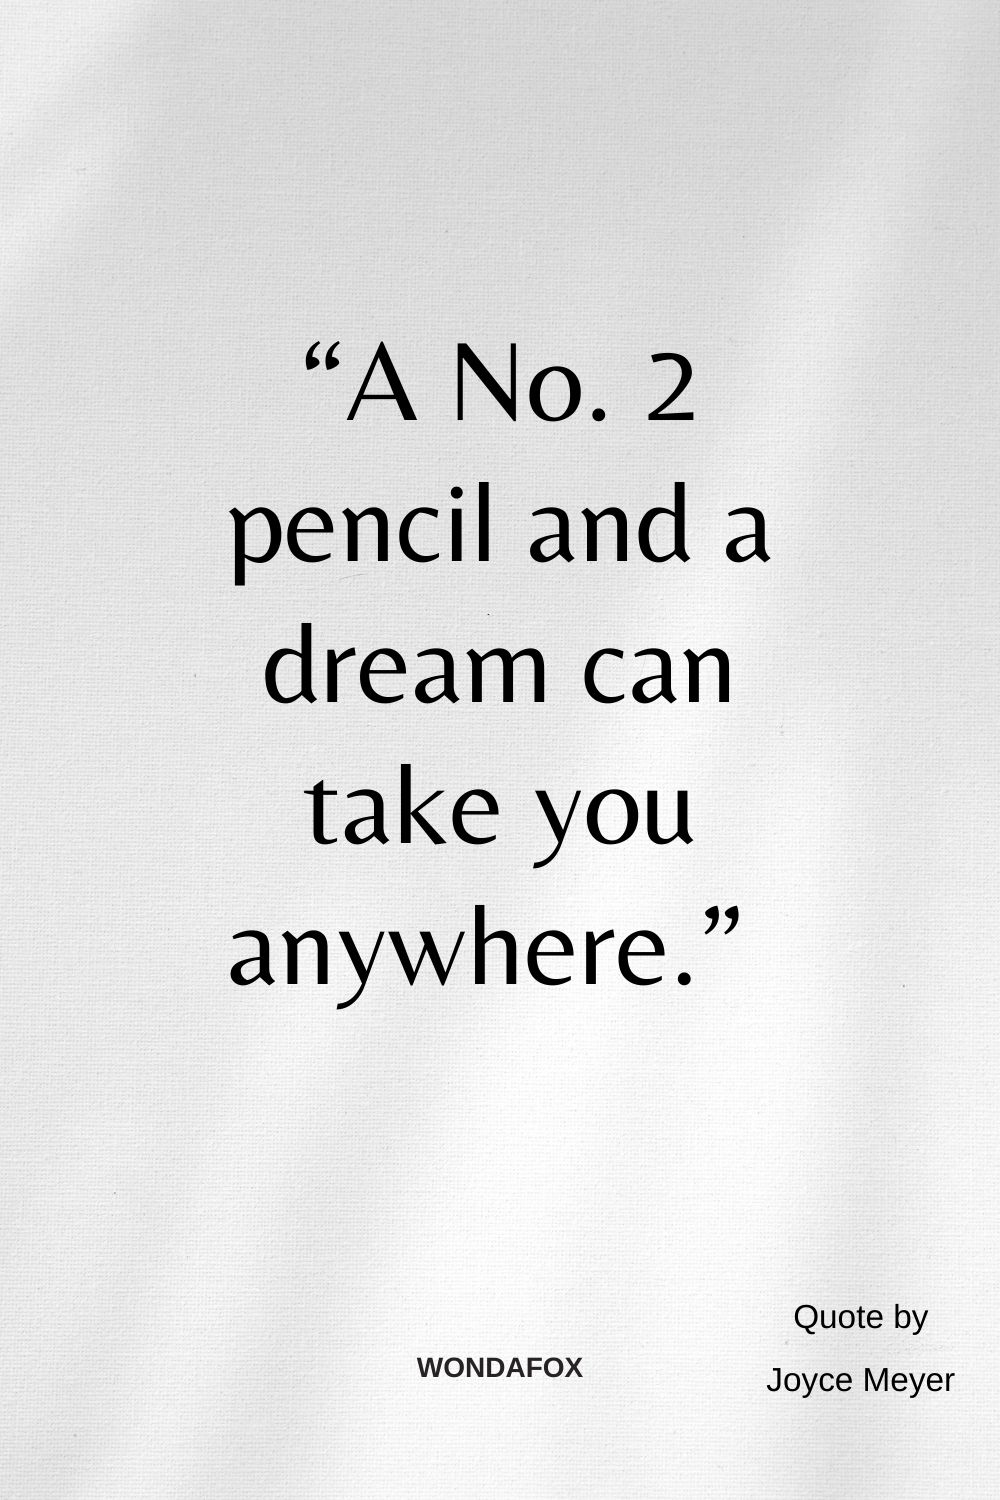 “A No. 2 pencil and a dream can take you anywhere.” 
Joyce Meyer